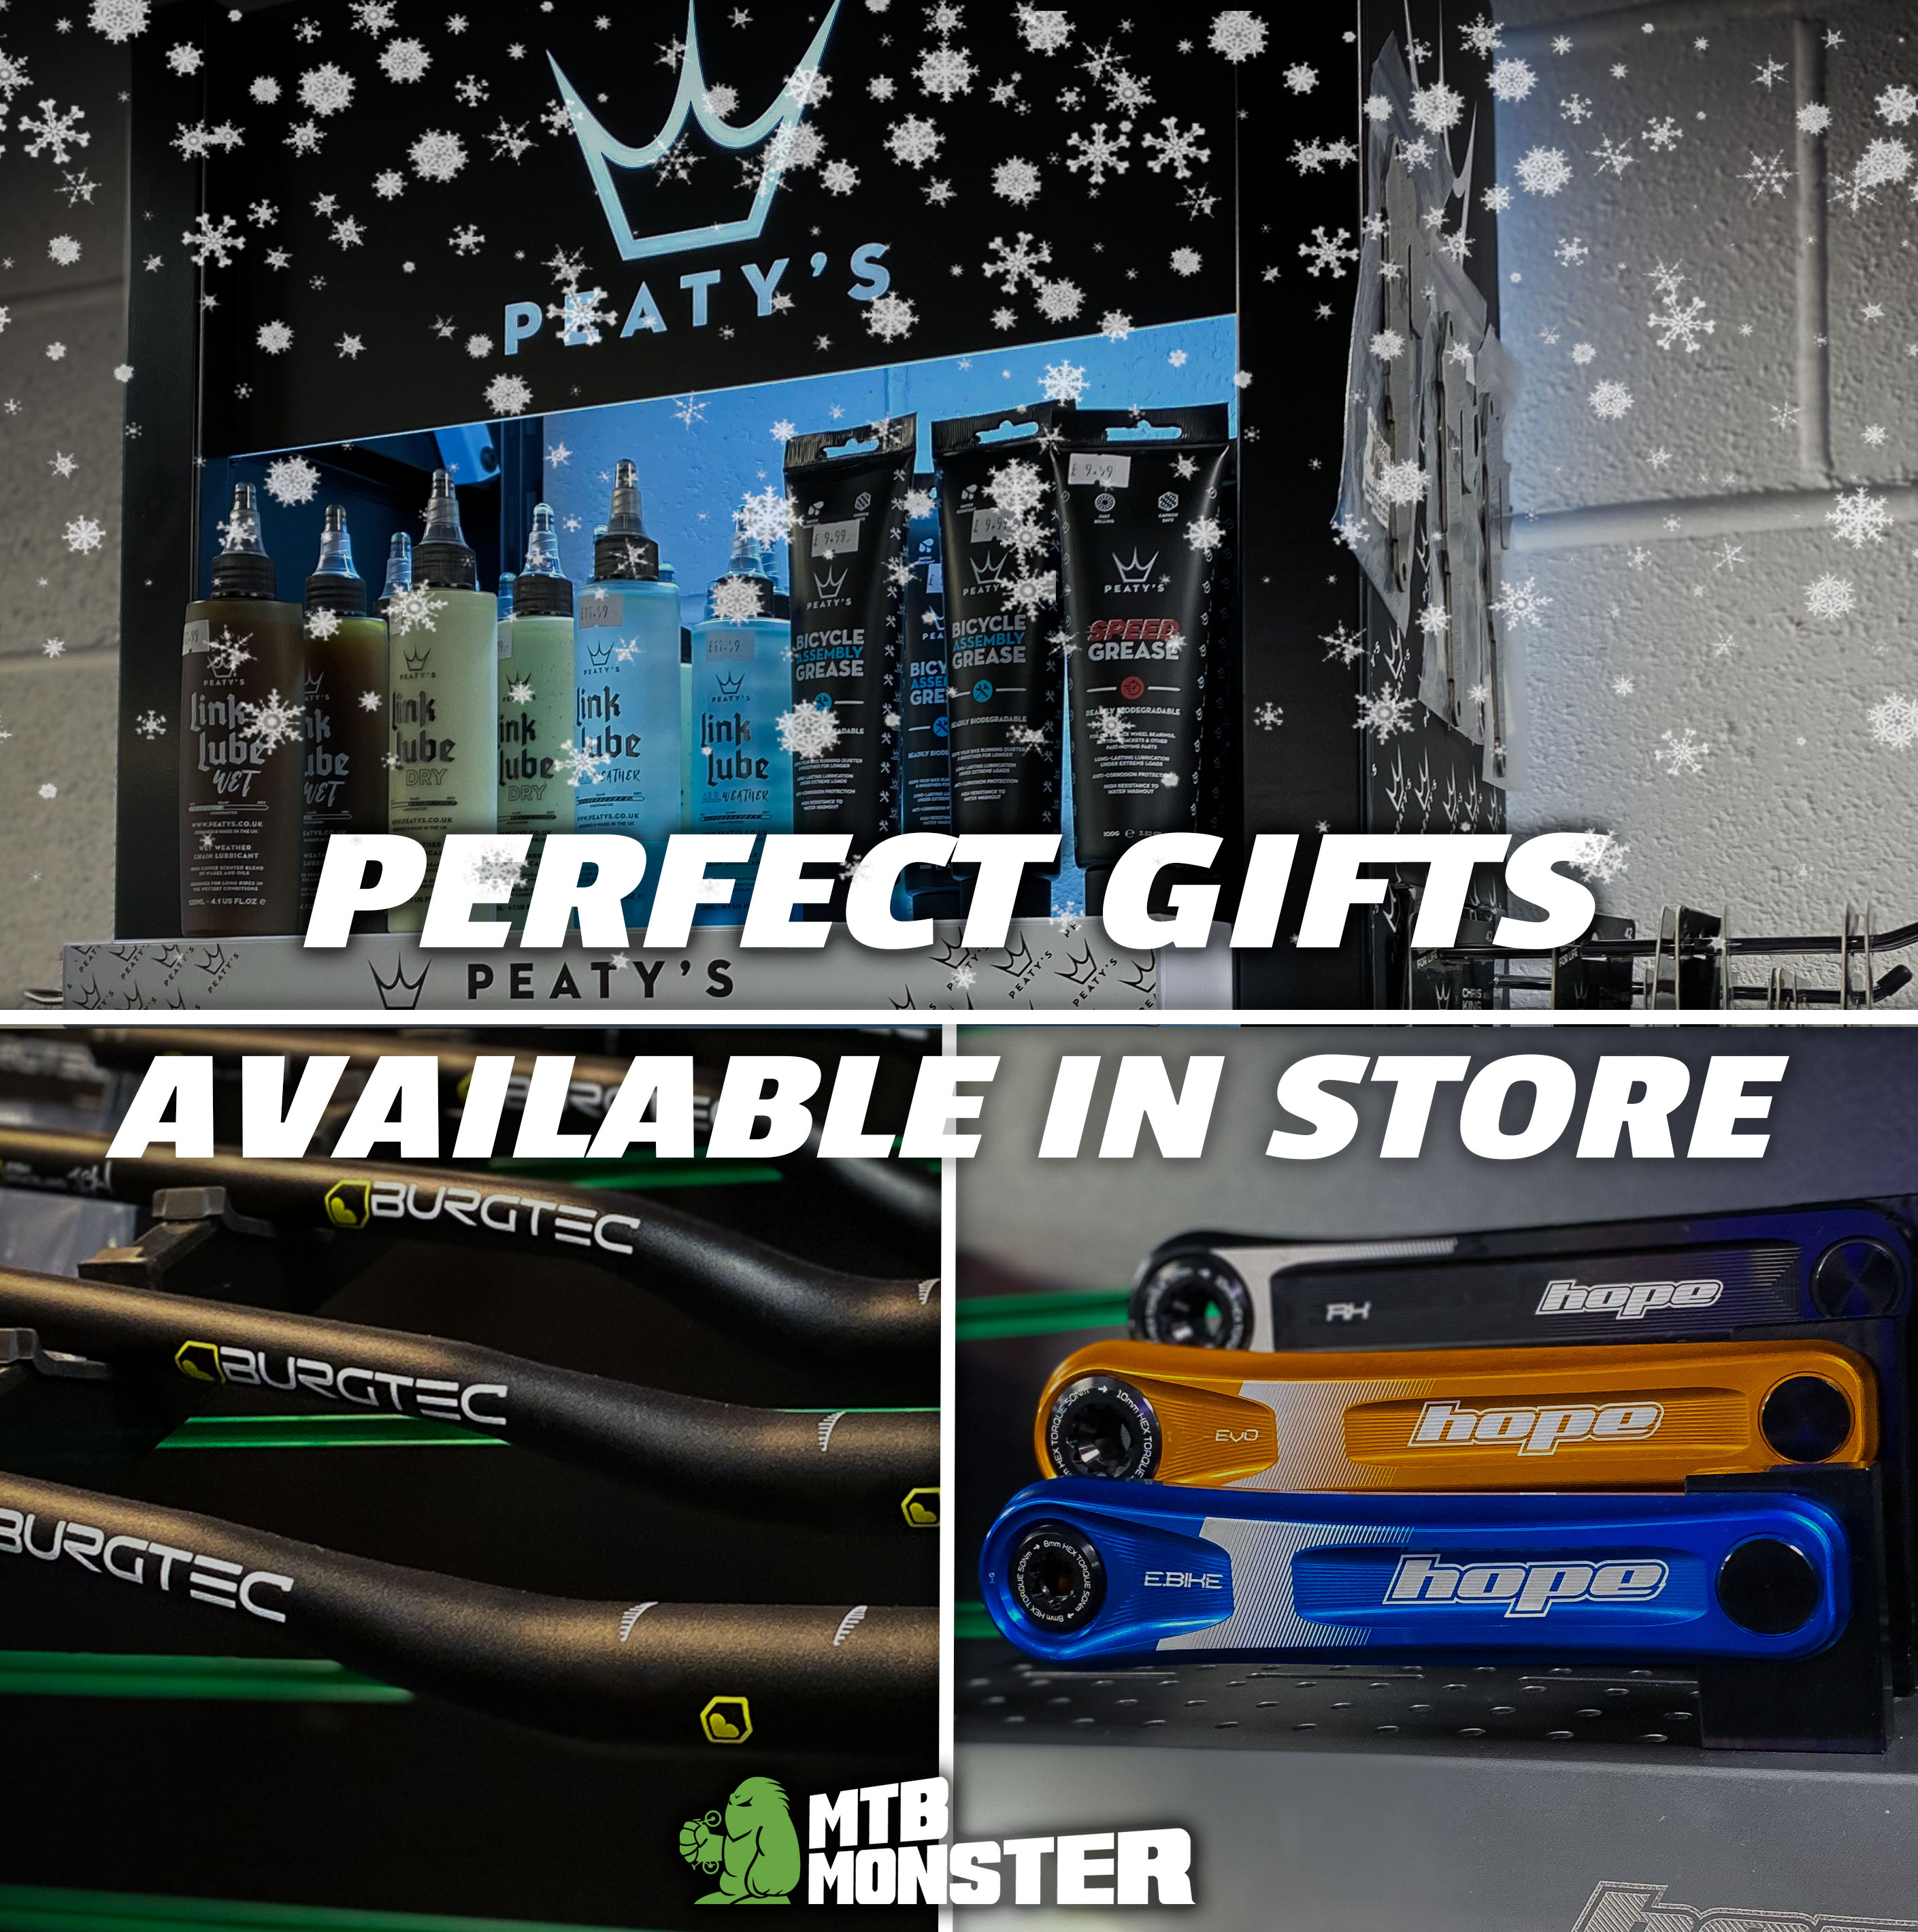 Perfect Gifts available in store now!